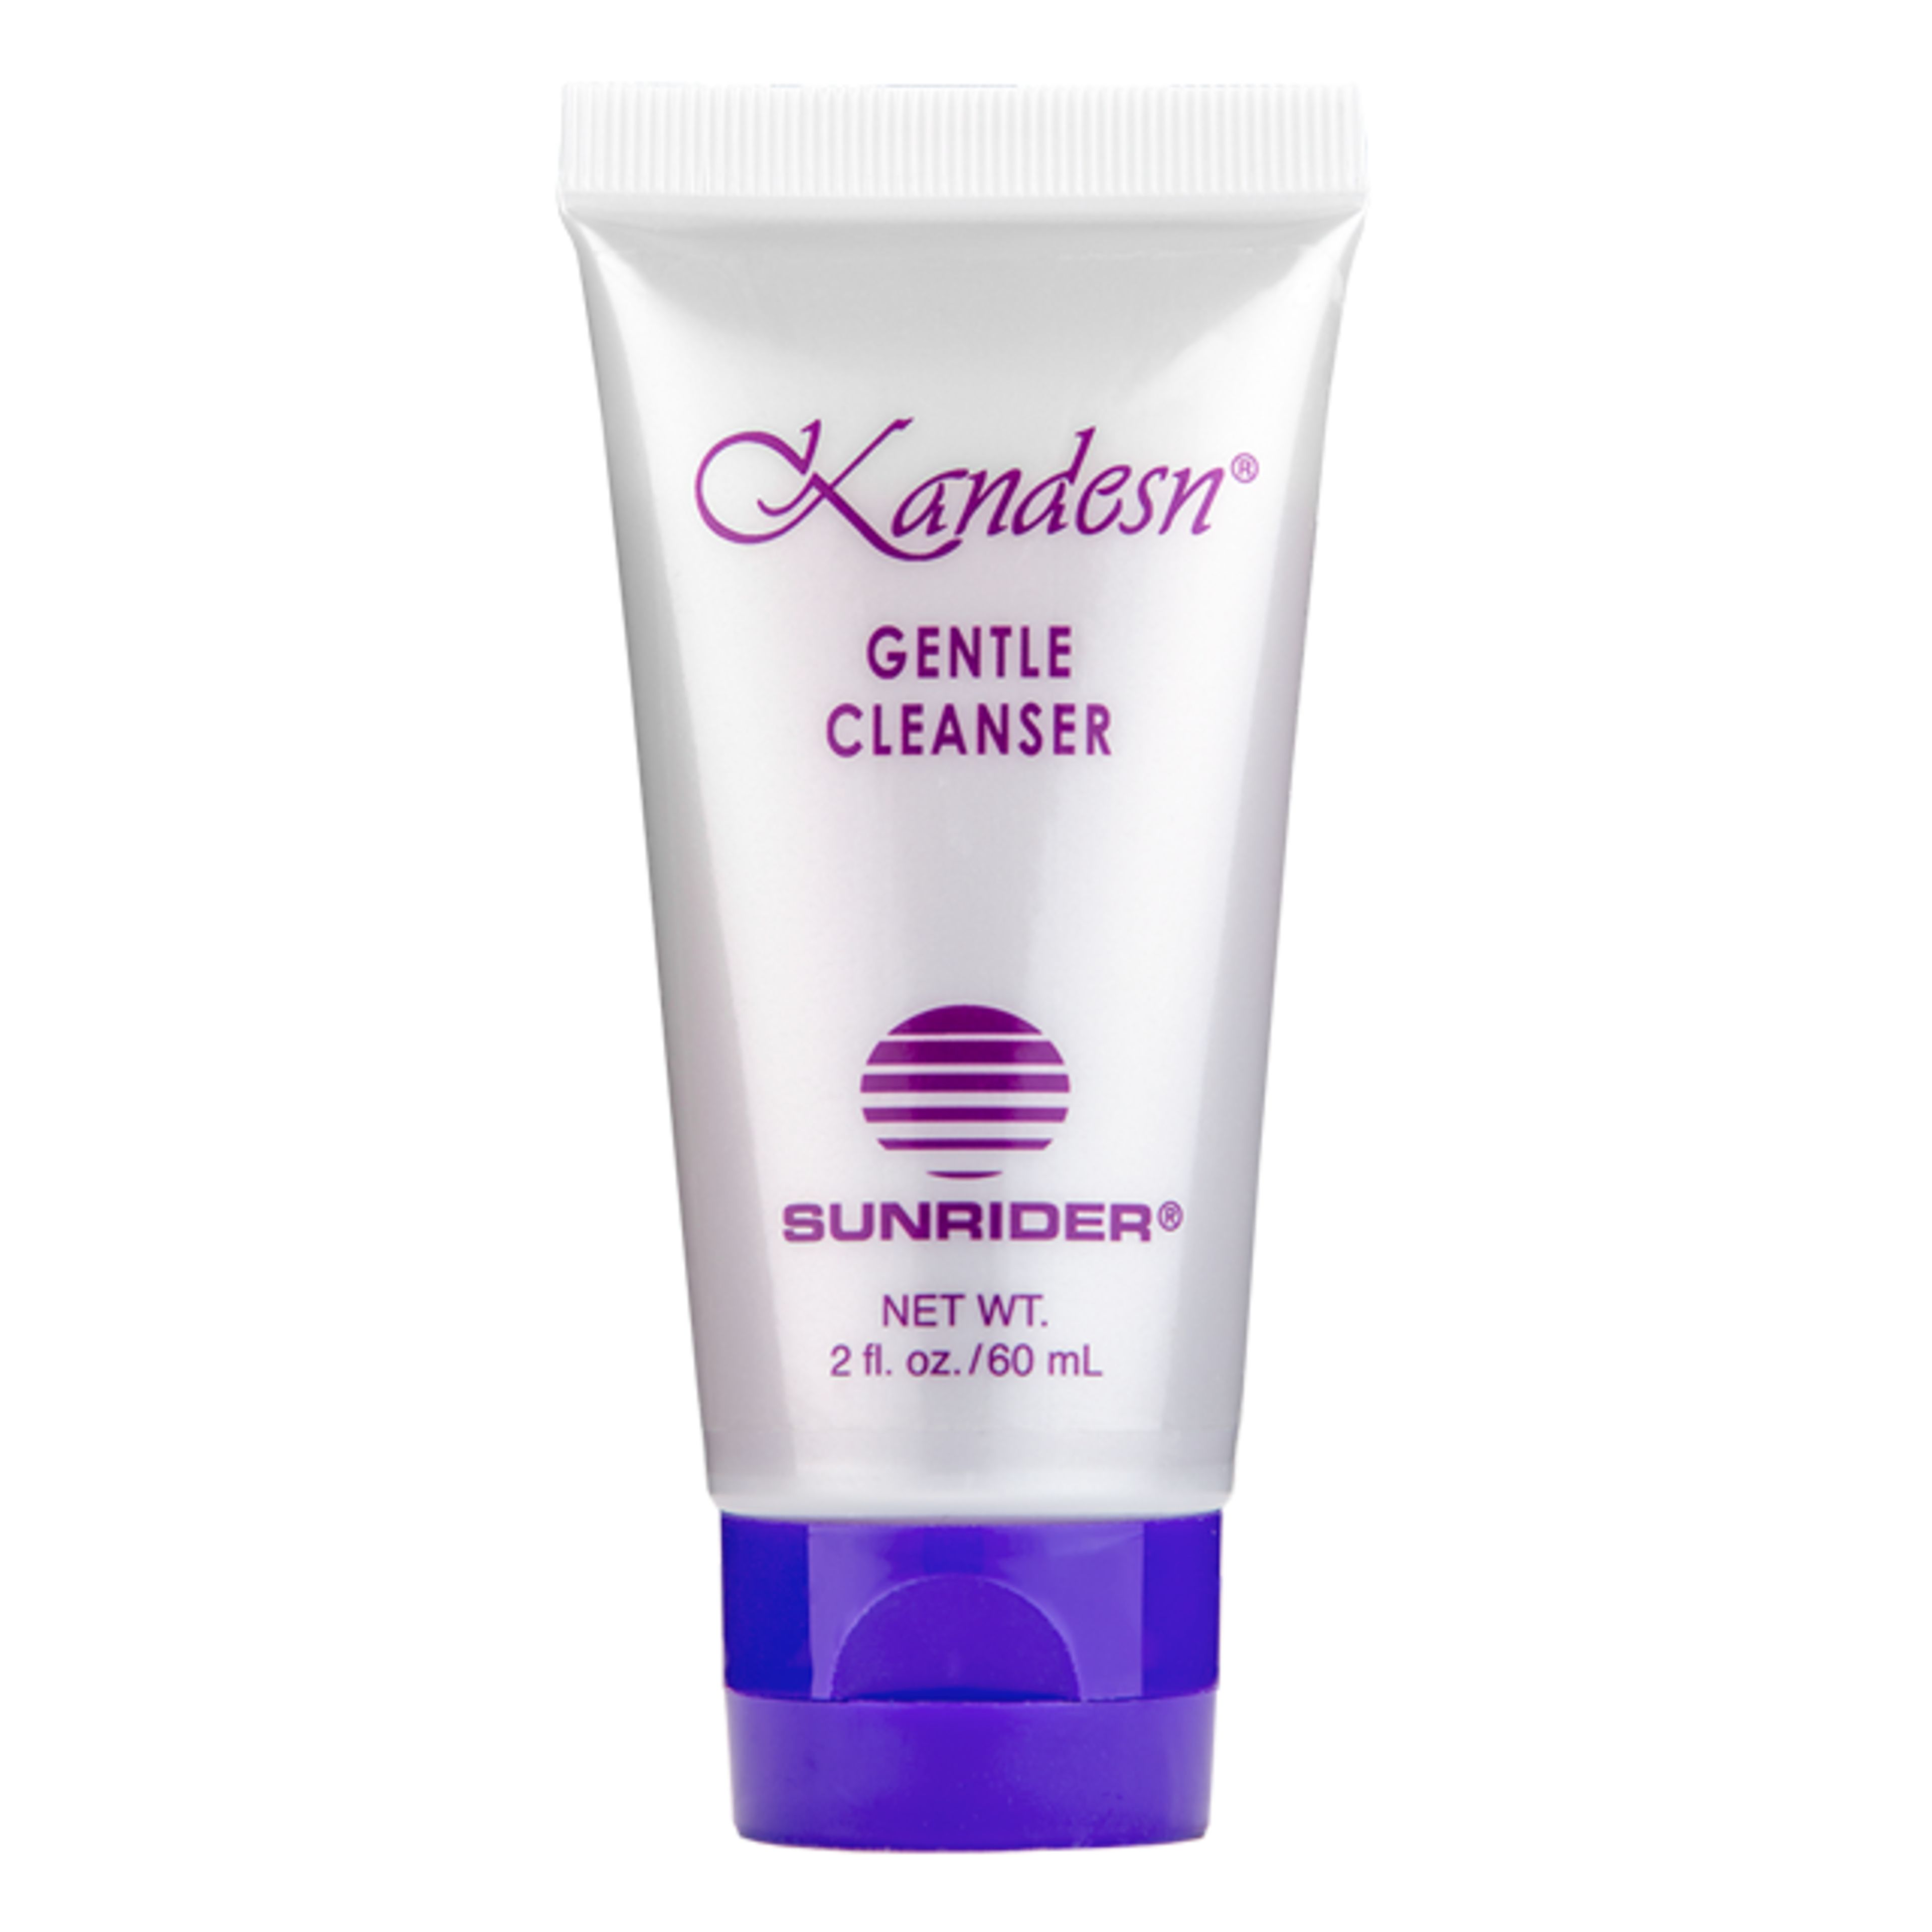 0128934-Kandesn-Gentle-Cleanser-2oz-In.png